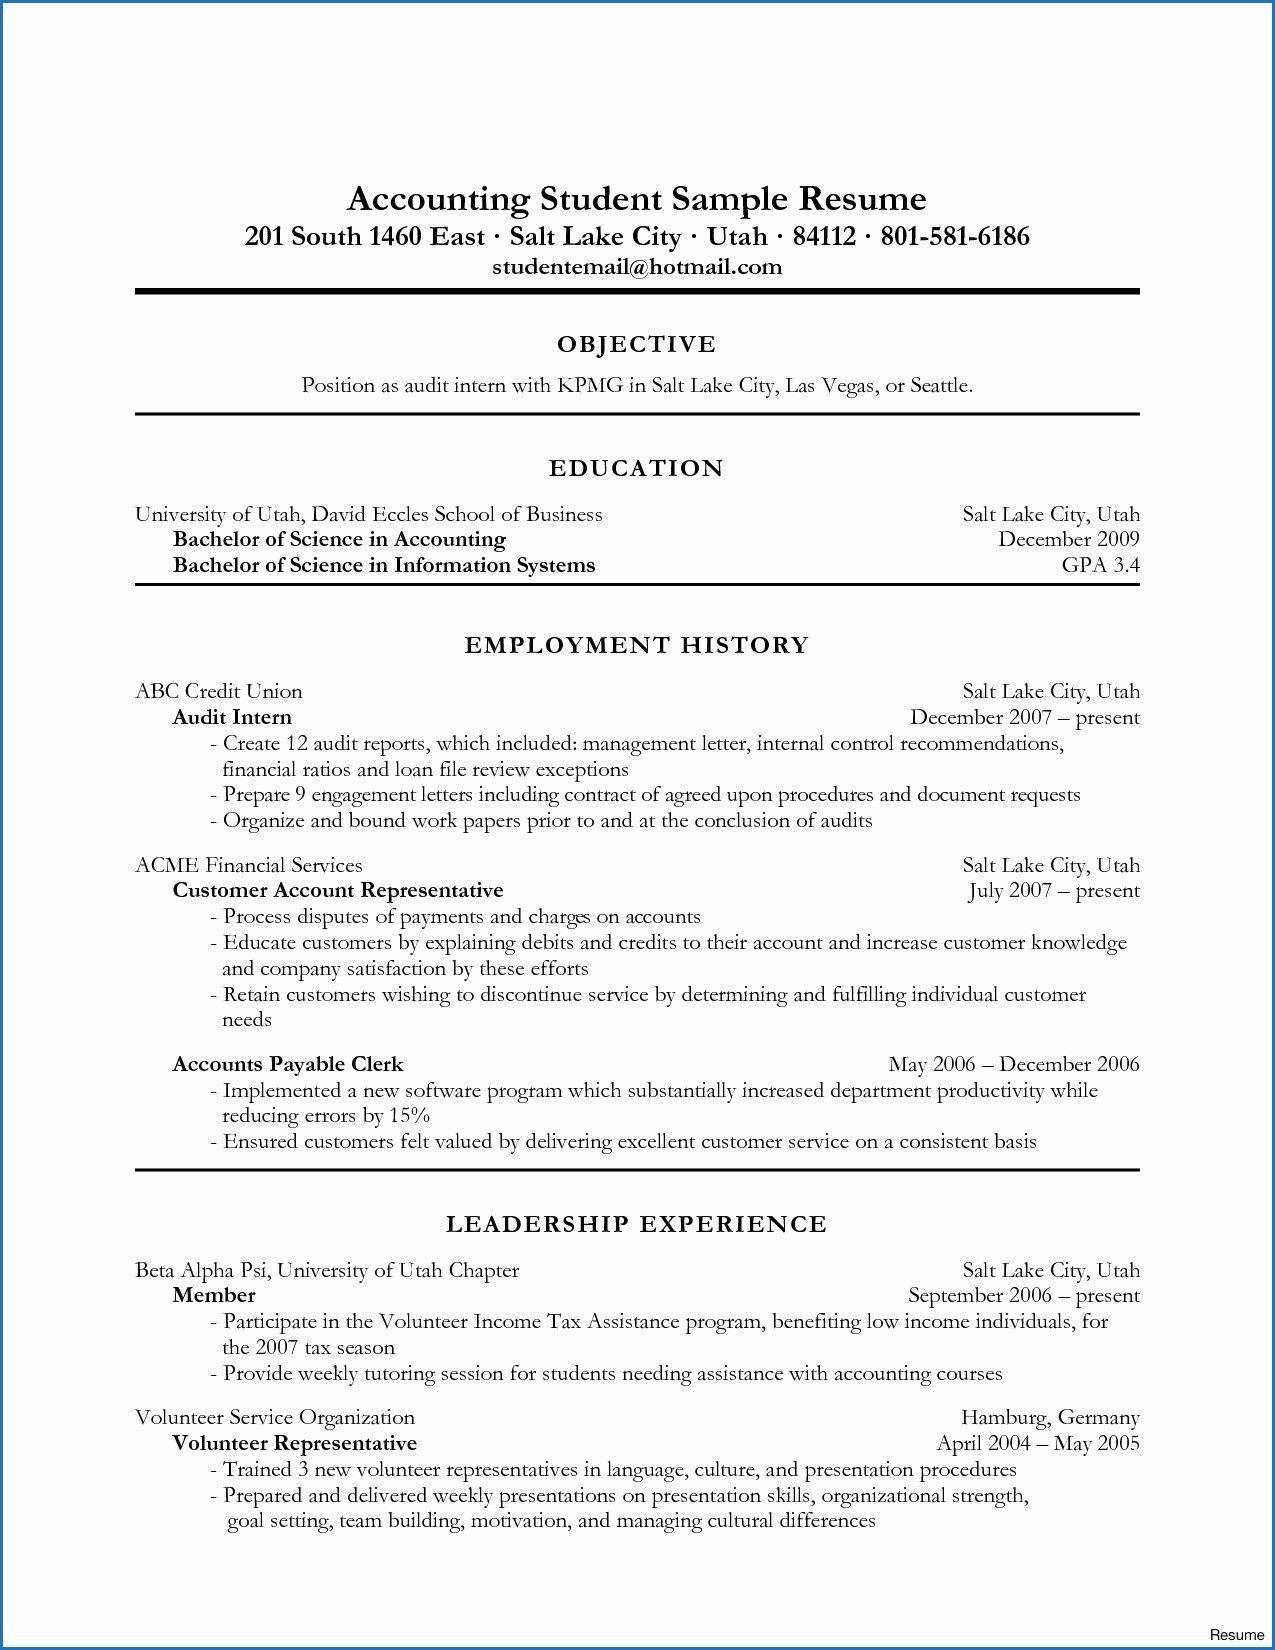 Sample Resume Objective Statements for Internship Resume Objective Examples Student